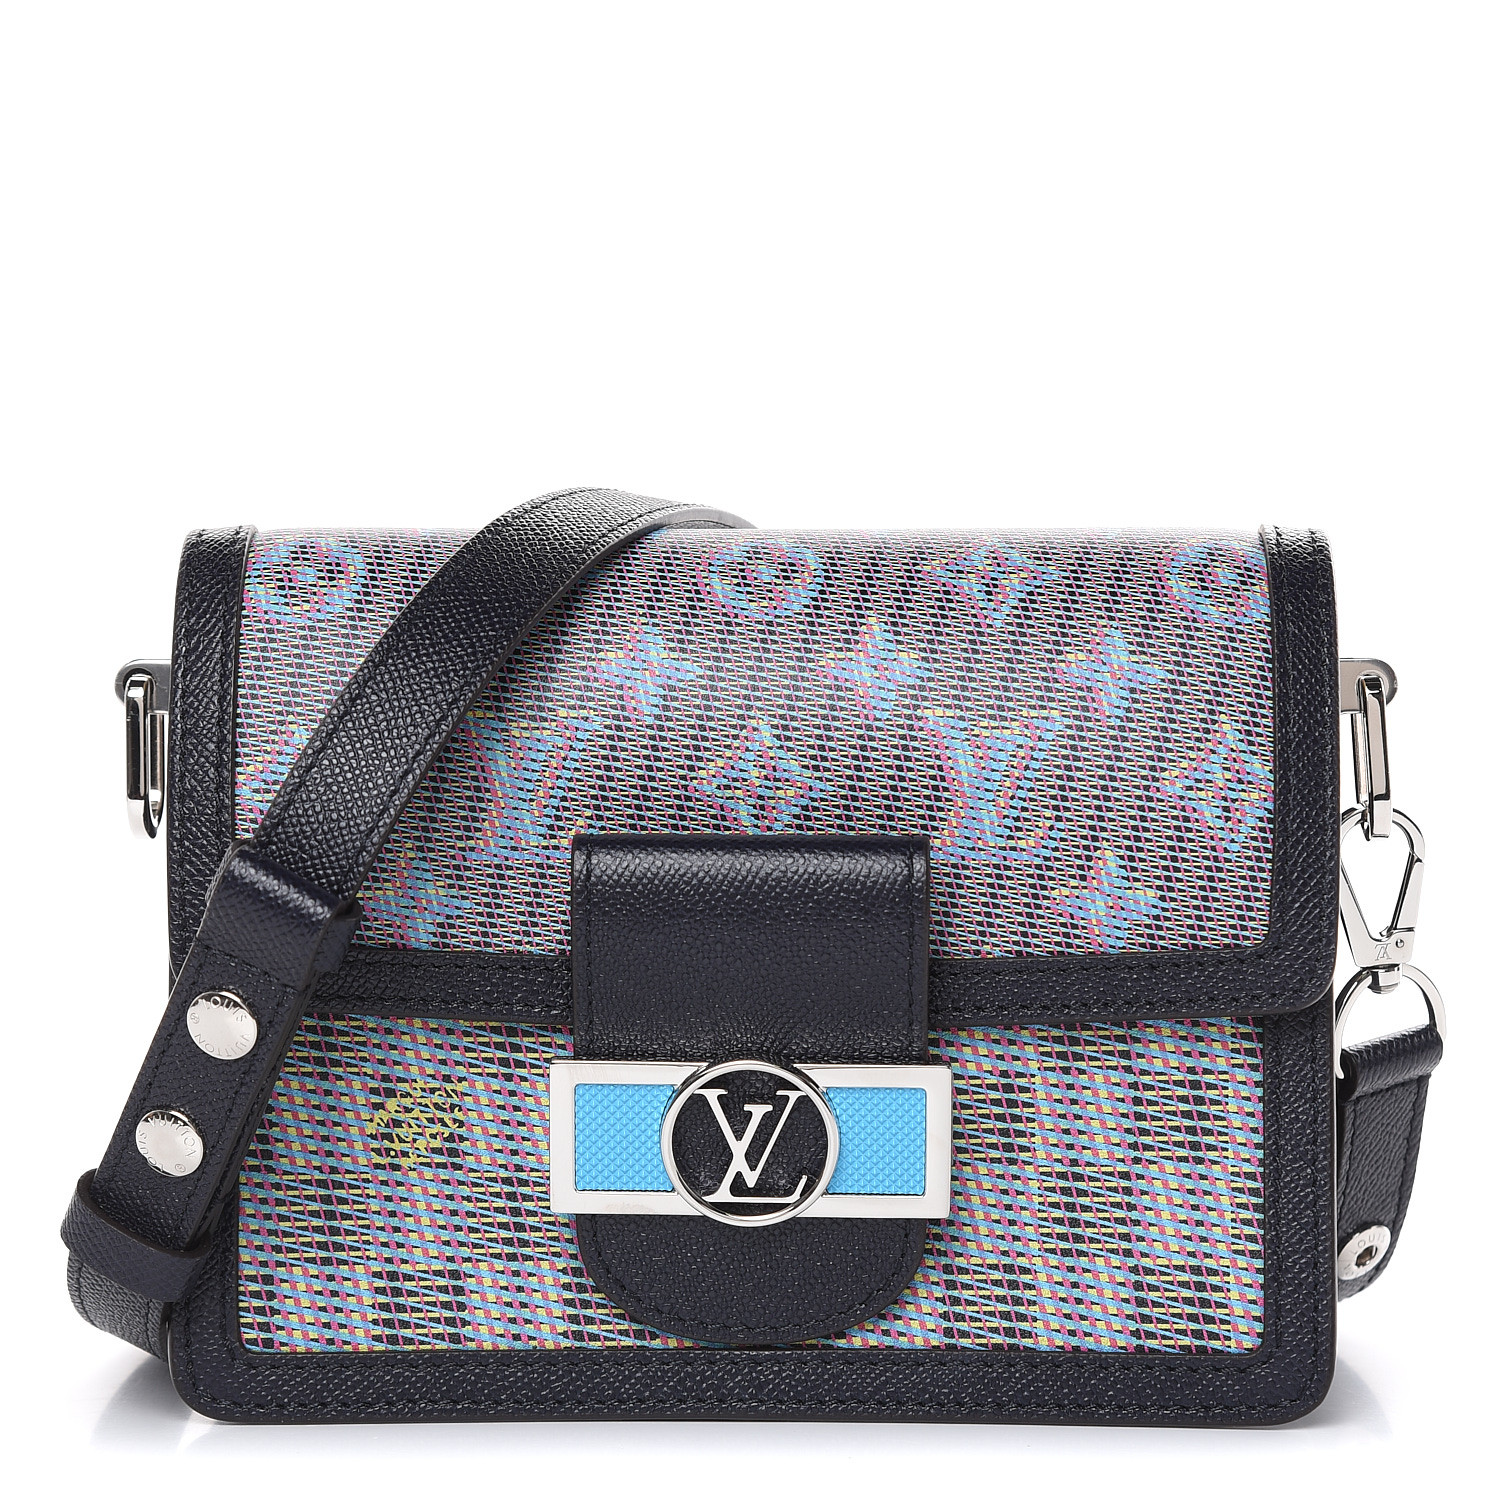 Louis Vuitton's Sac Plat BB Now Comes In Epi Leather - BAGAHOLICBOY